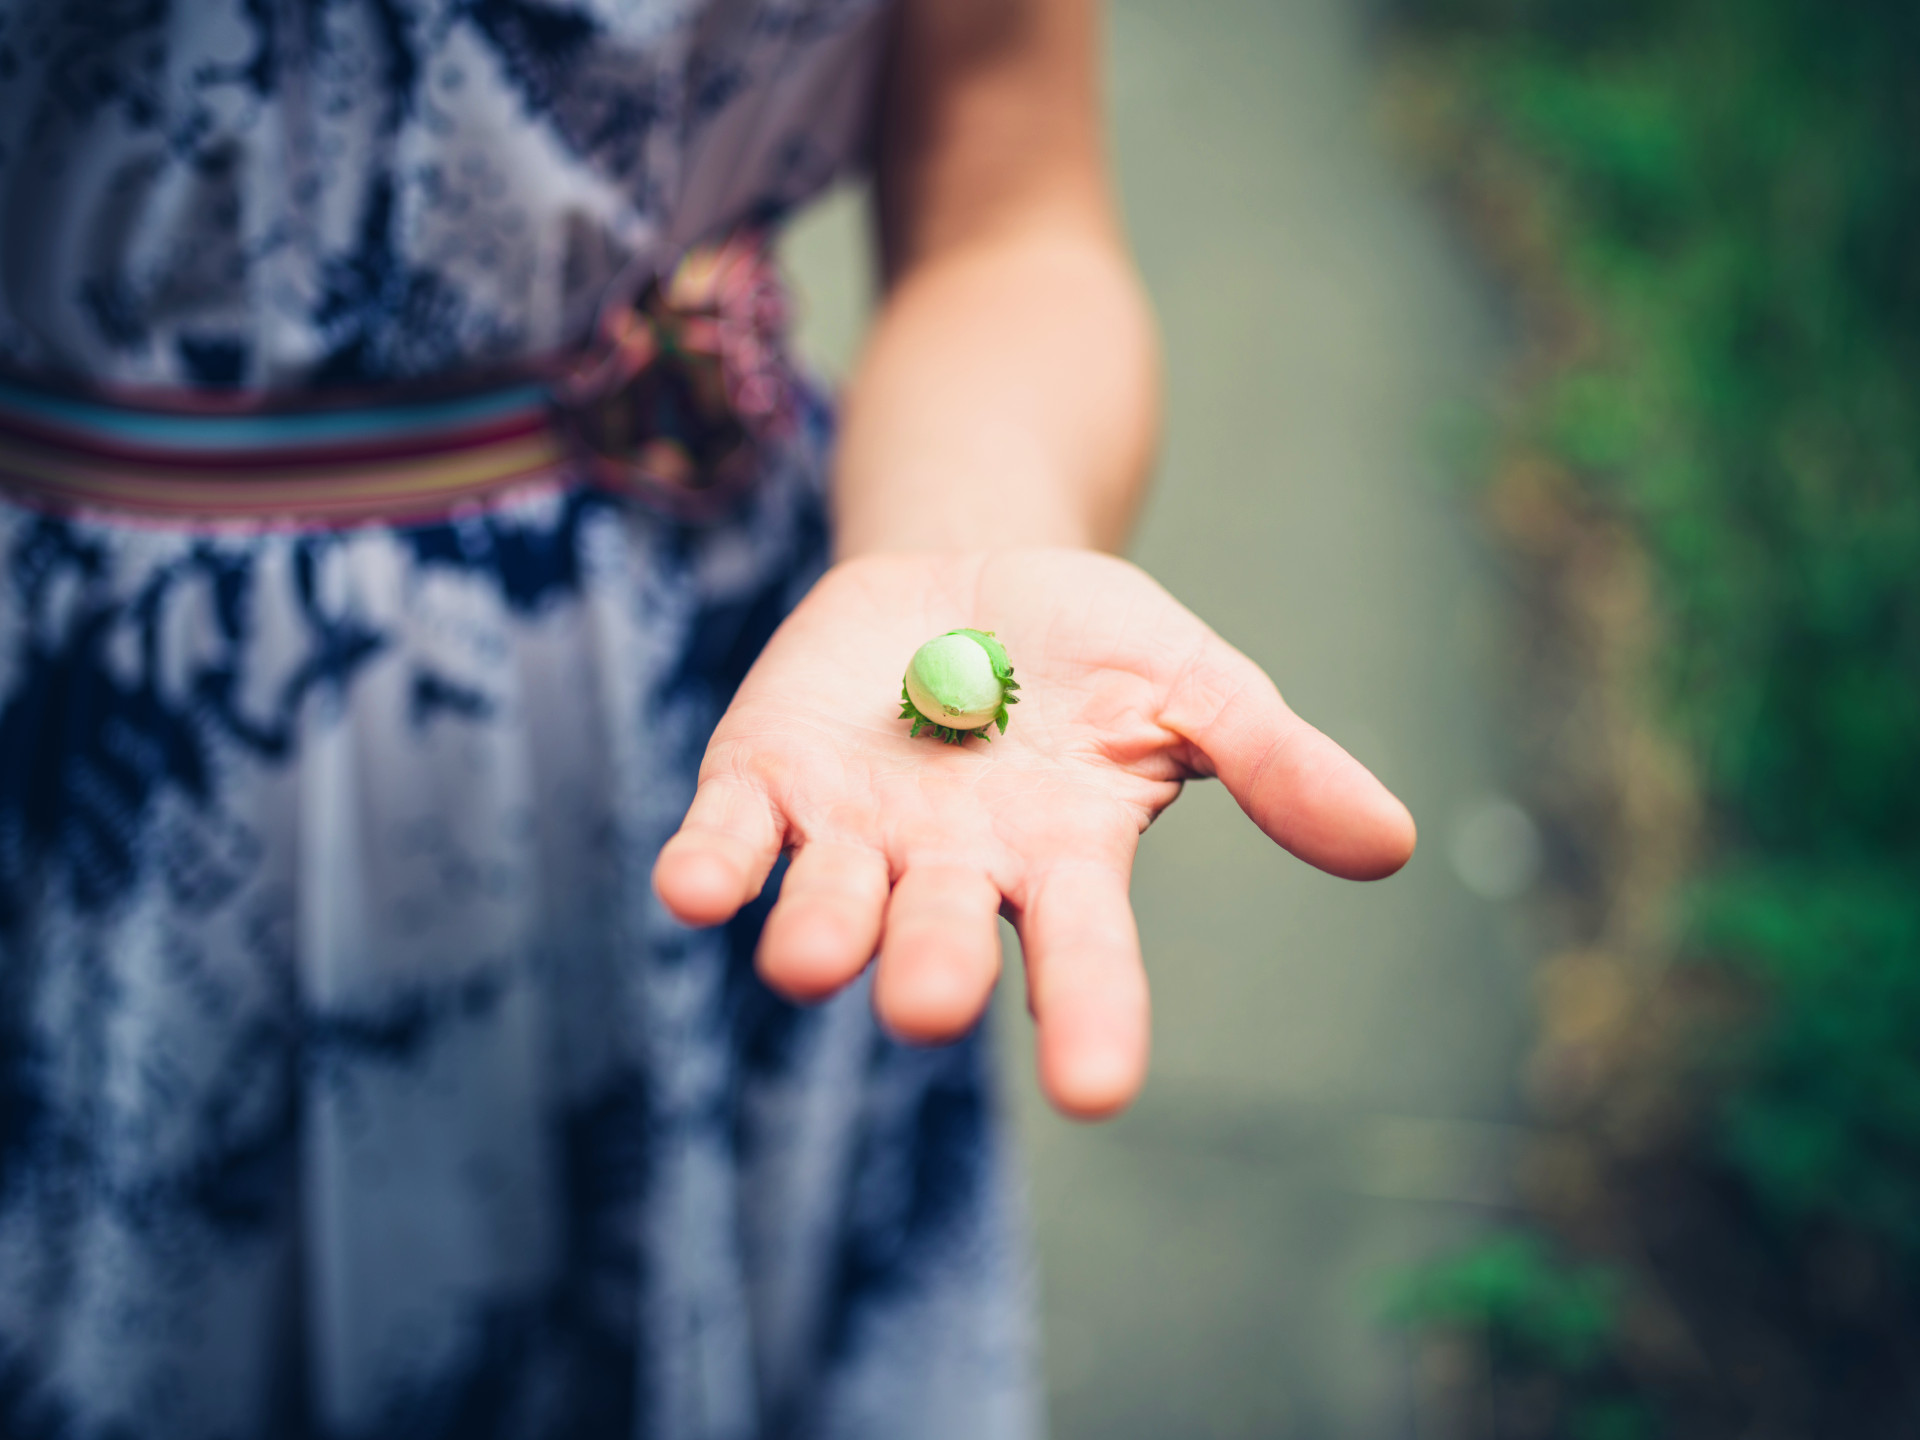 A girl holding a hazelnut in her open palm indicating the famous metaphor of Julian of Norwich in A Revelation of Love